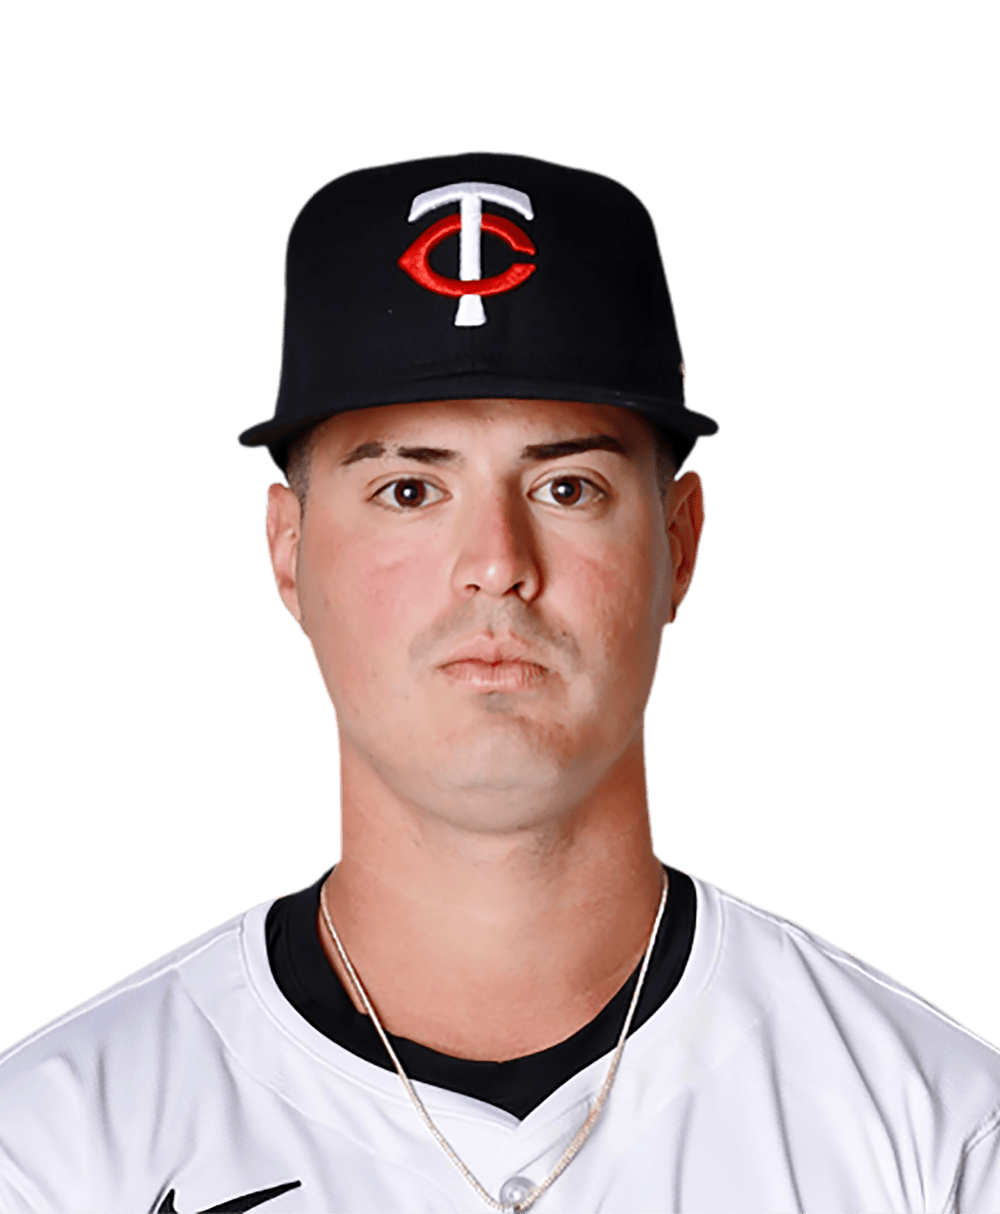 Jose Miranda's first 365 days in a Twins uniform: The good, the